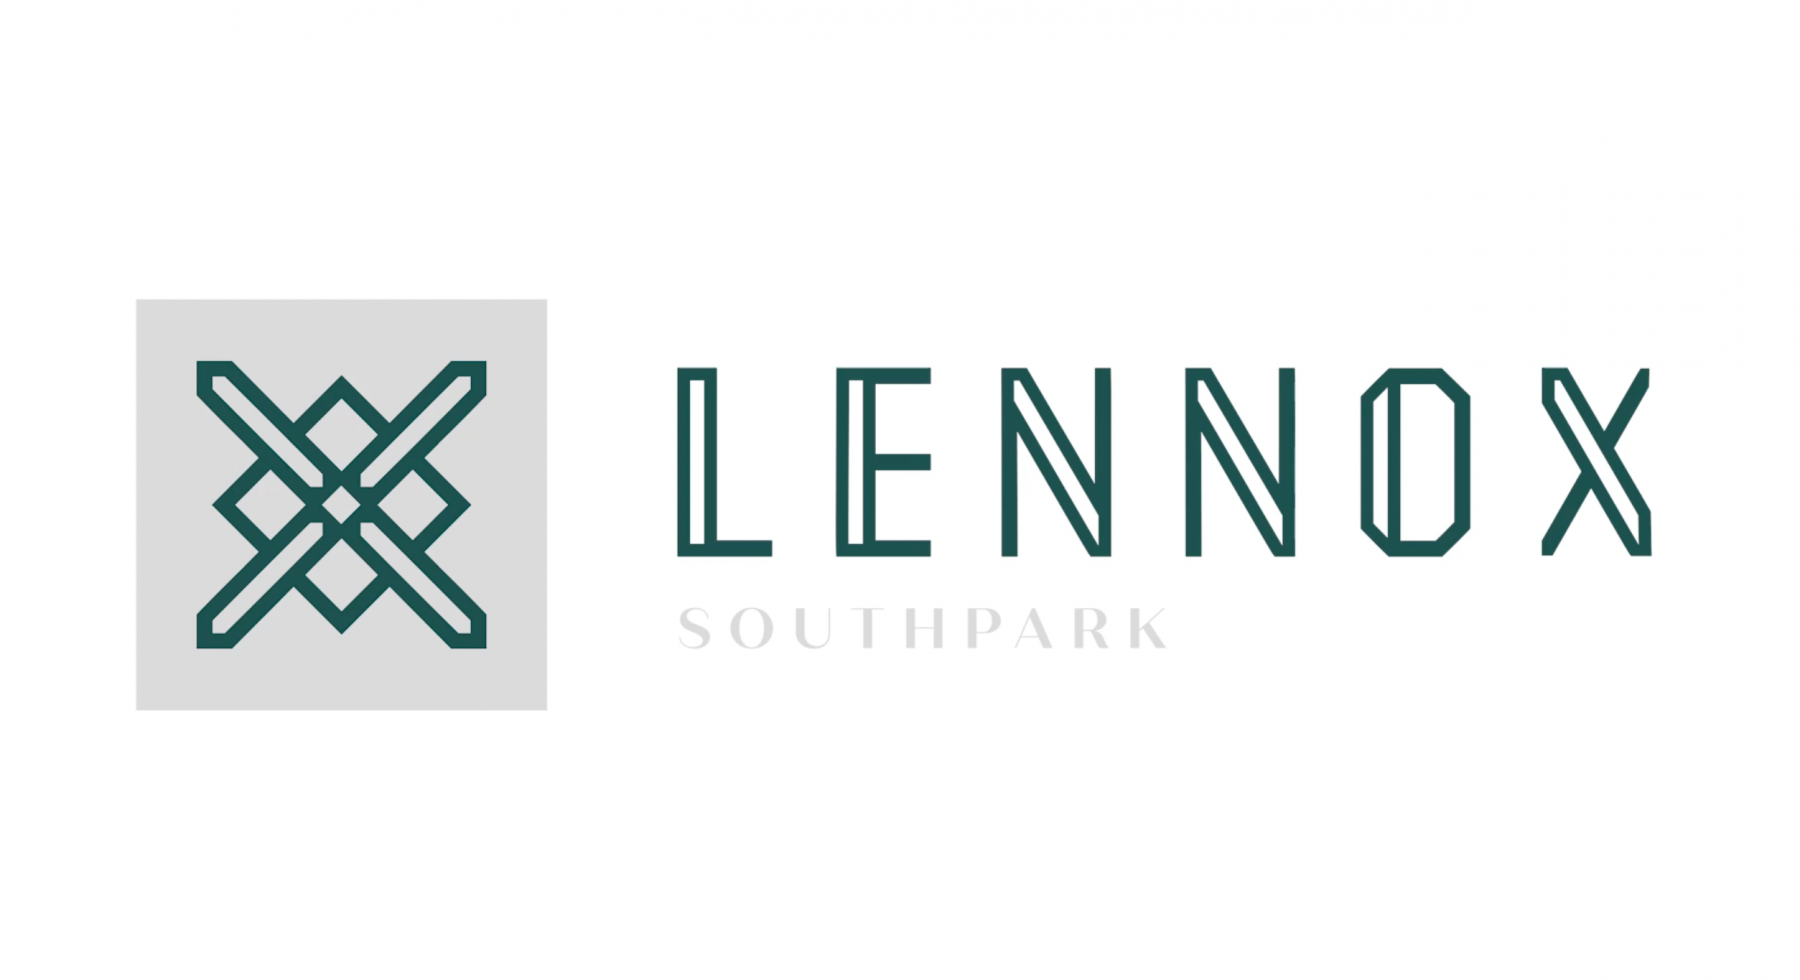 Lennox Southpark Welcome Video